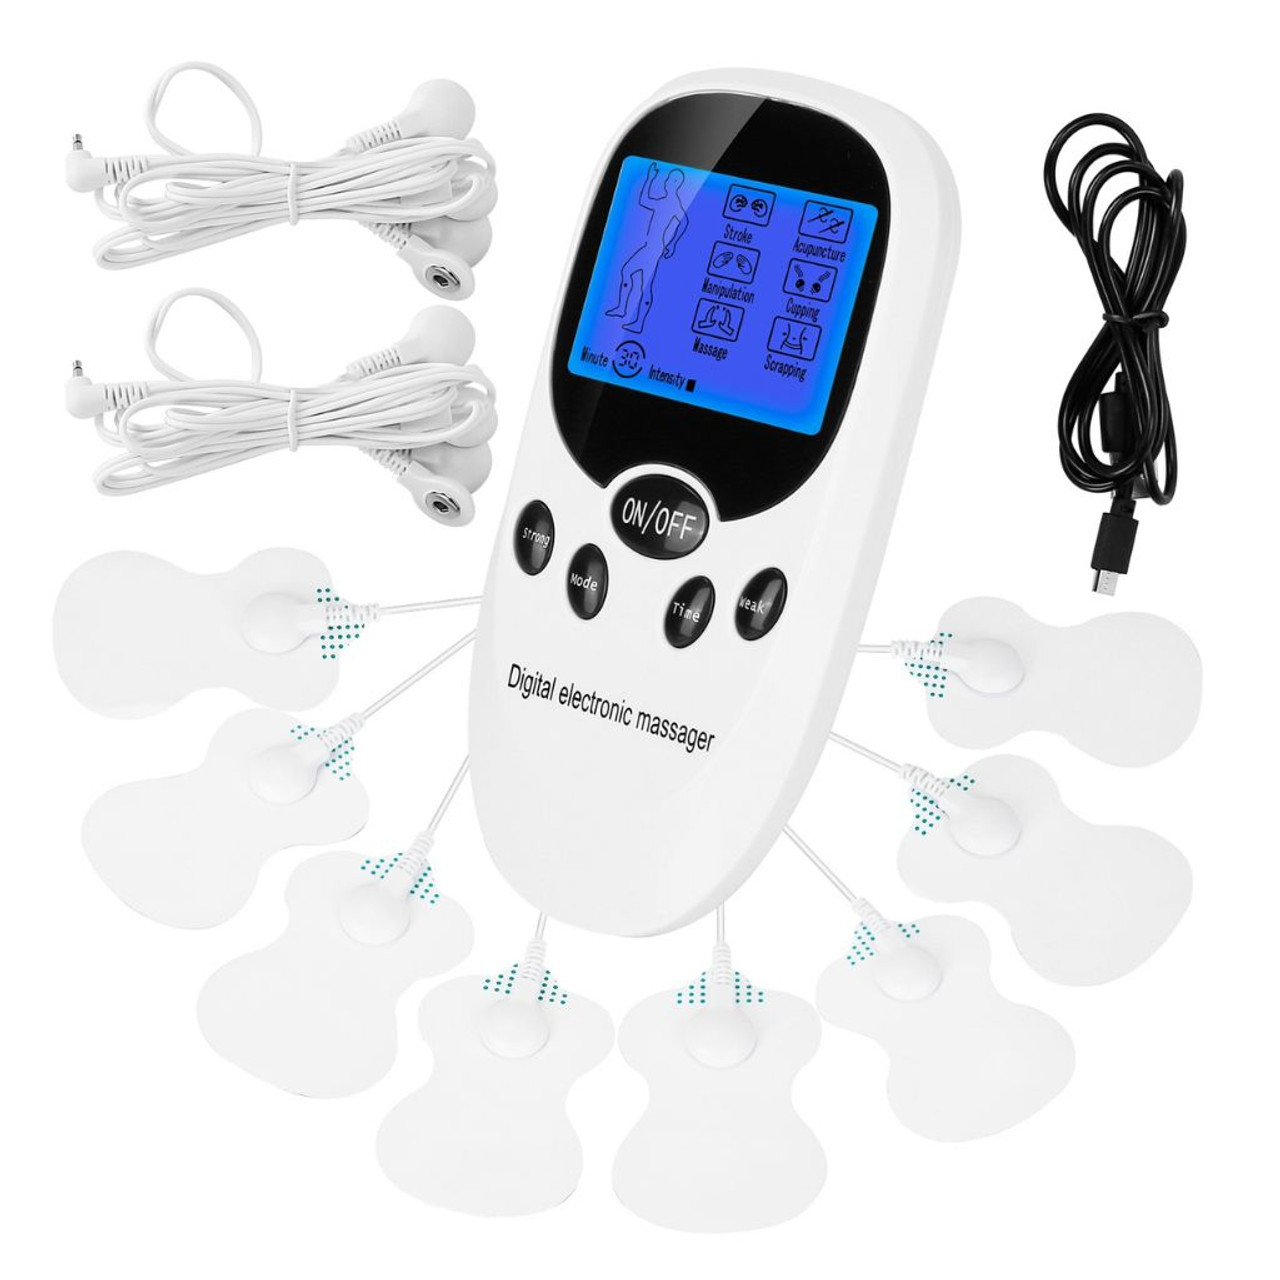 RelaxUltima Portable Neck Massager with TENS Pulse Technology